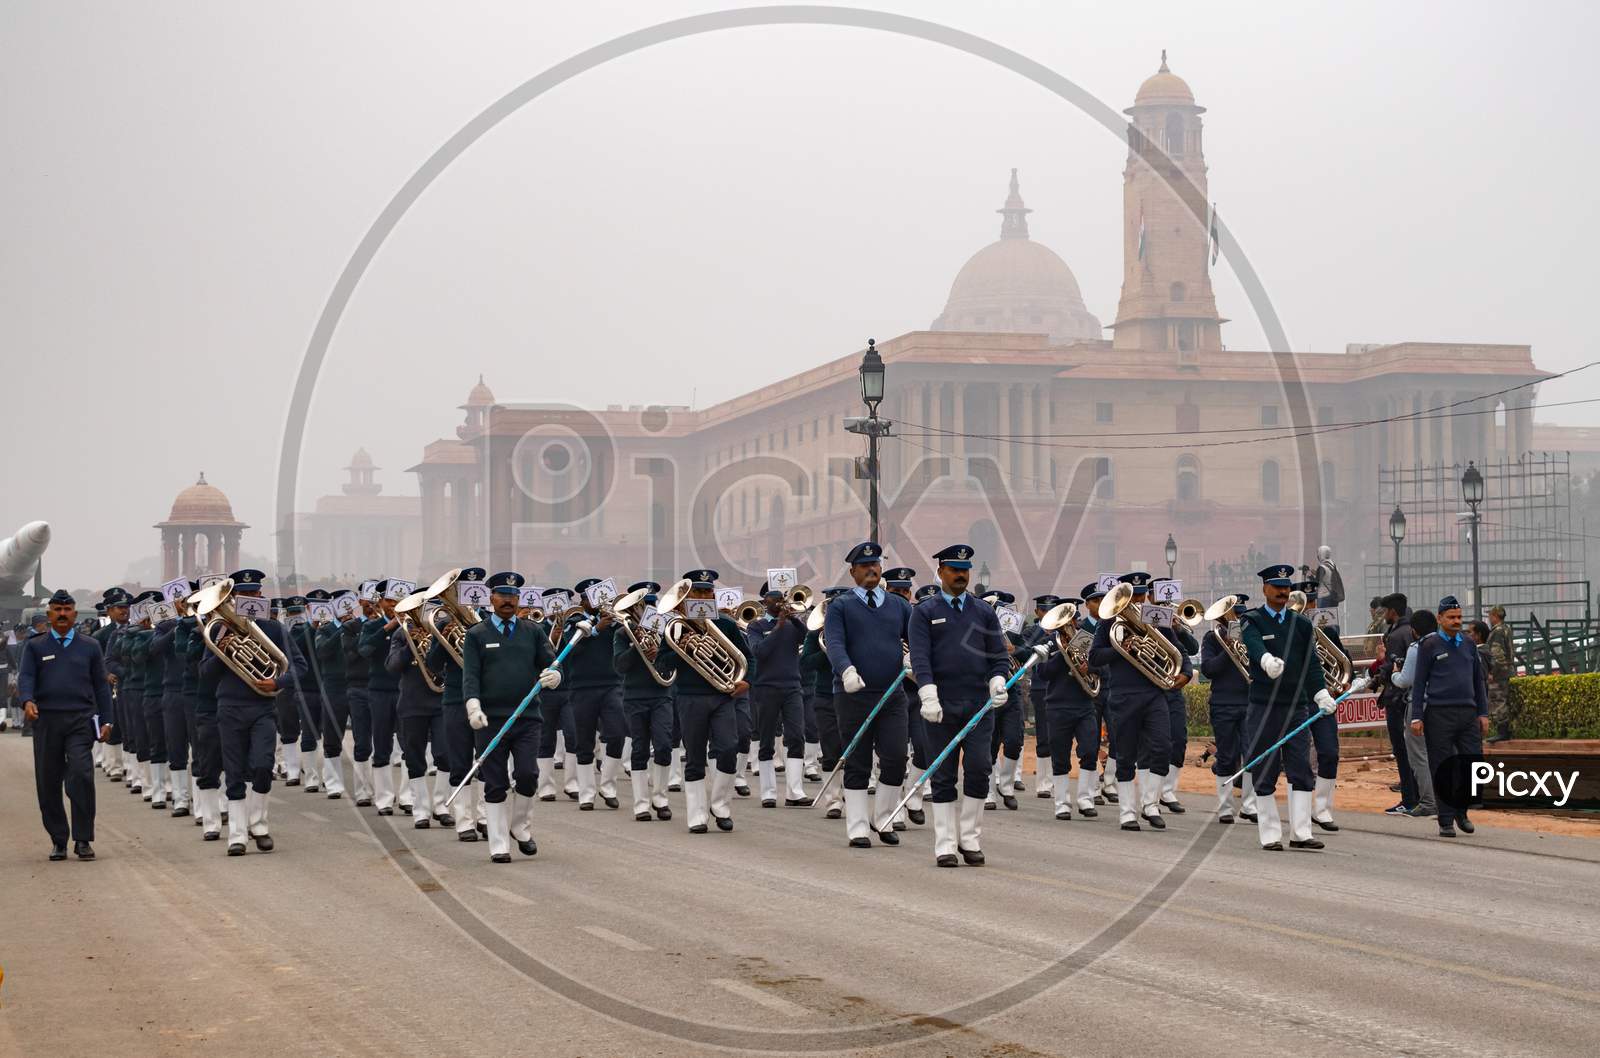 Indian Air Force, air arm of the Indian Armed Forces, Doing parade rehearsal for 71st Republic Day 2020